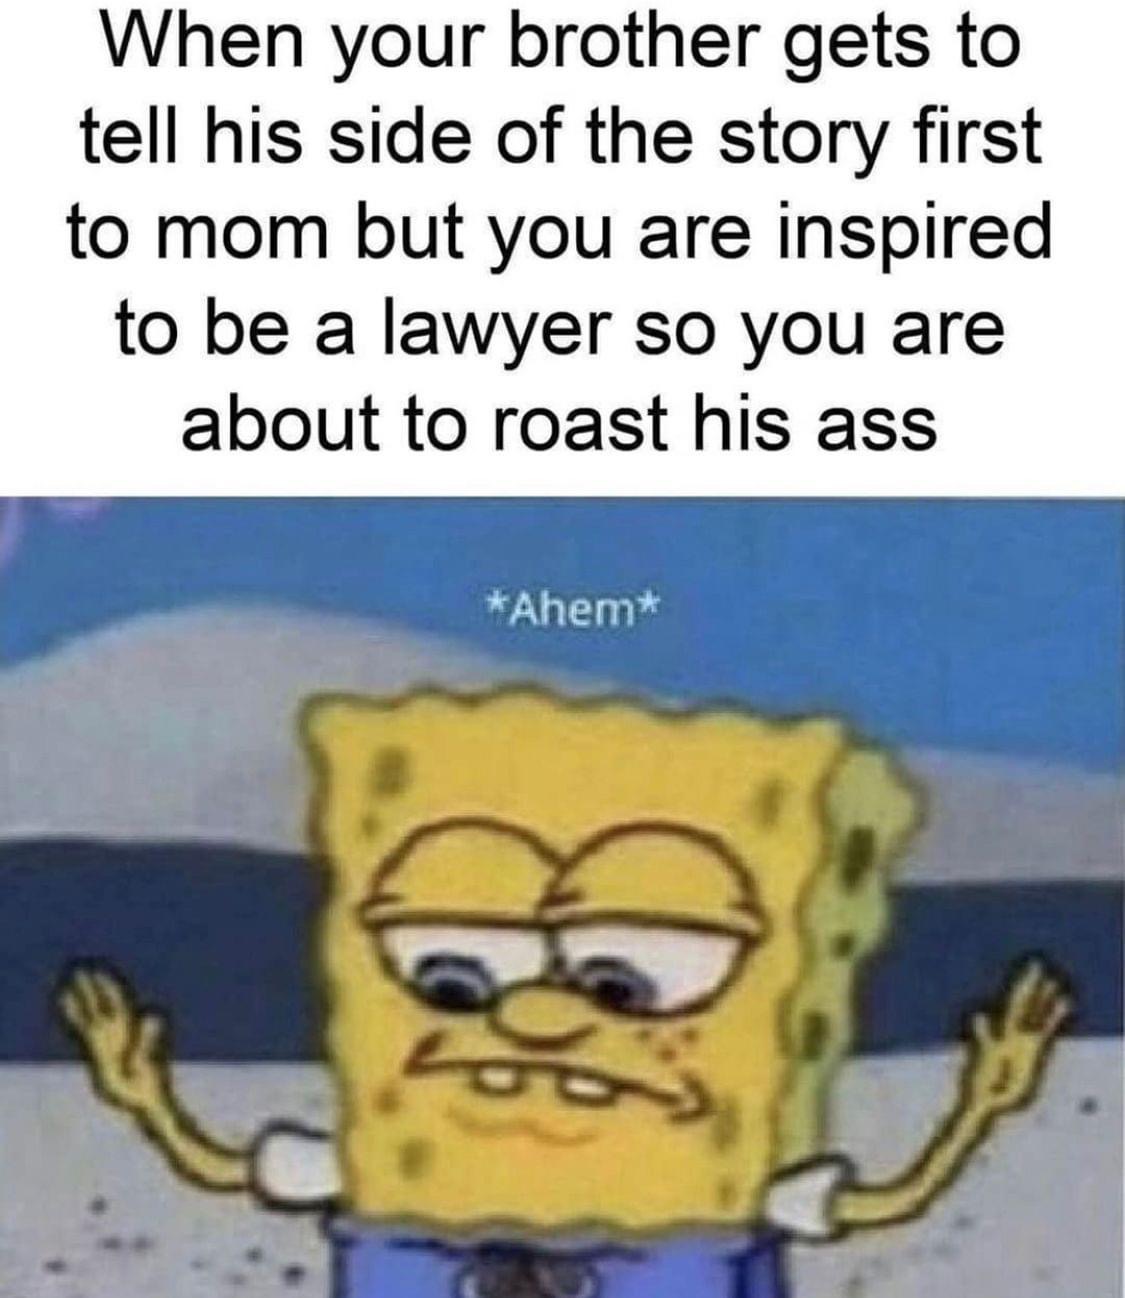 funny - When your brother gets to tell his side of the story first to mom but you are inspired to be a lawyer so you are about to roast his ass Ahem